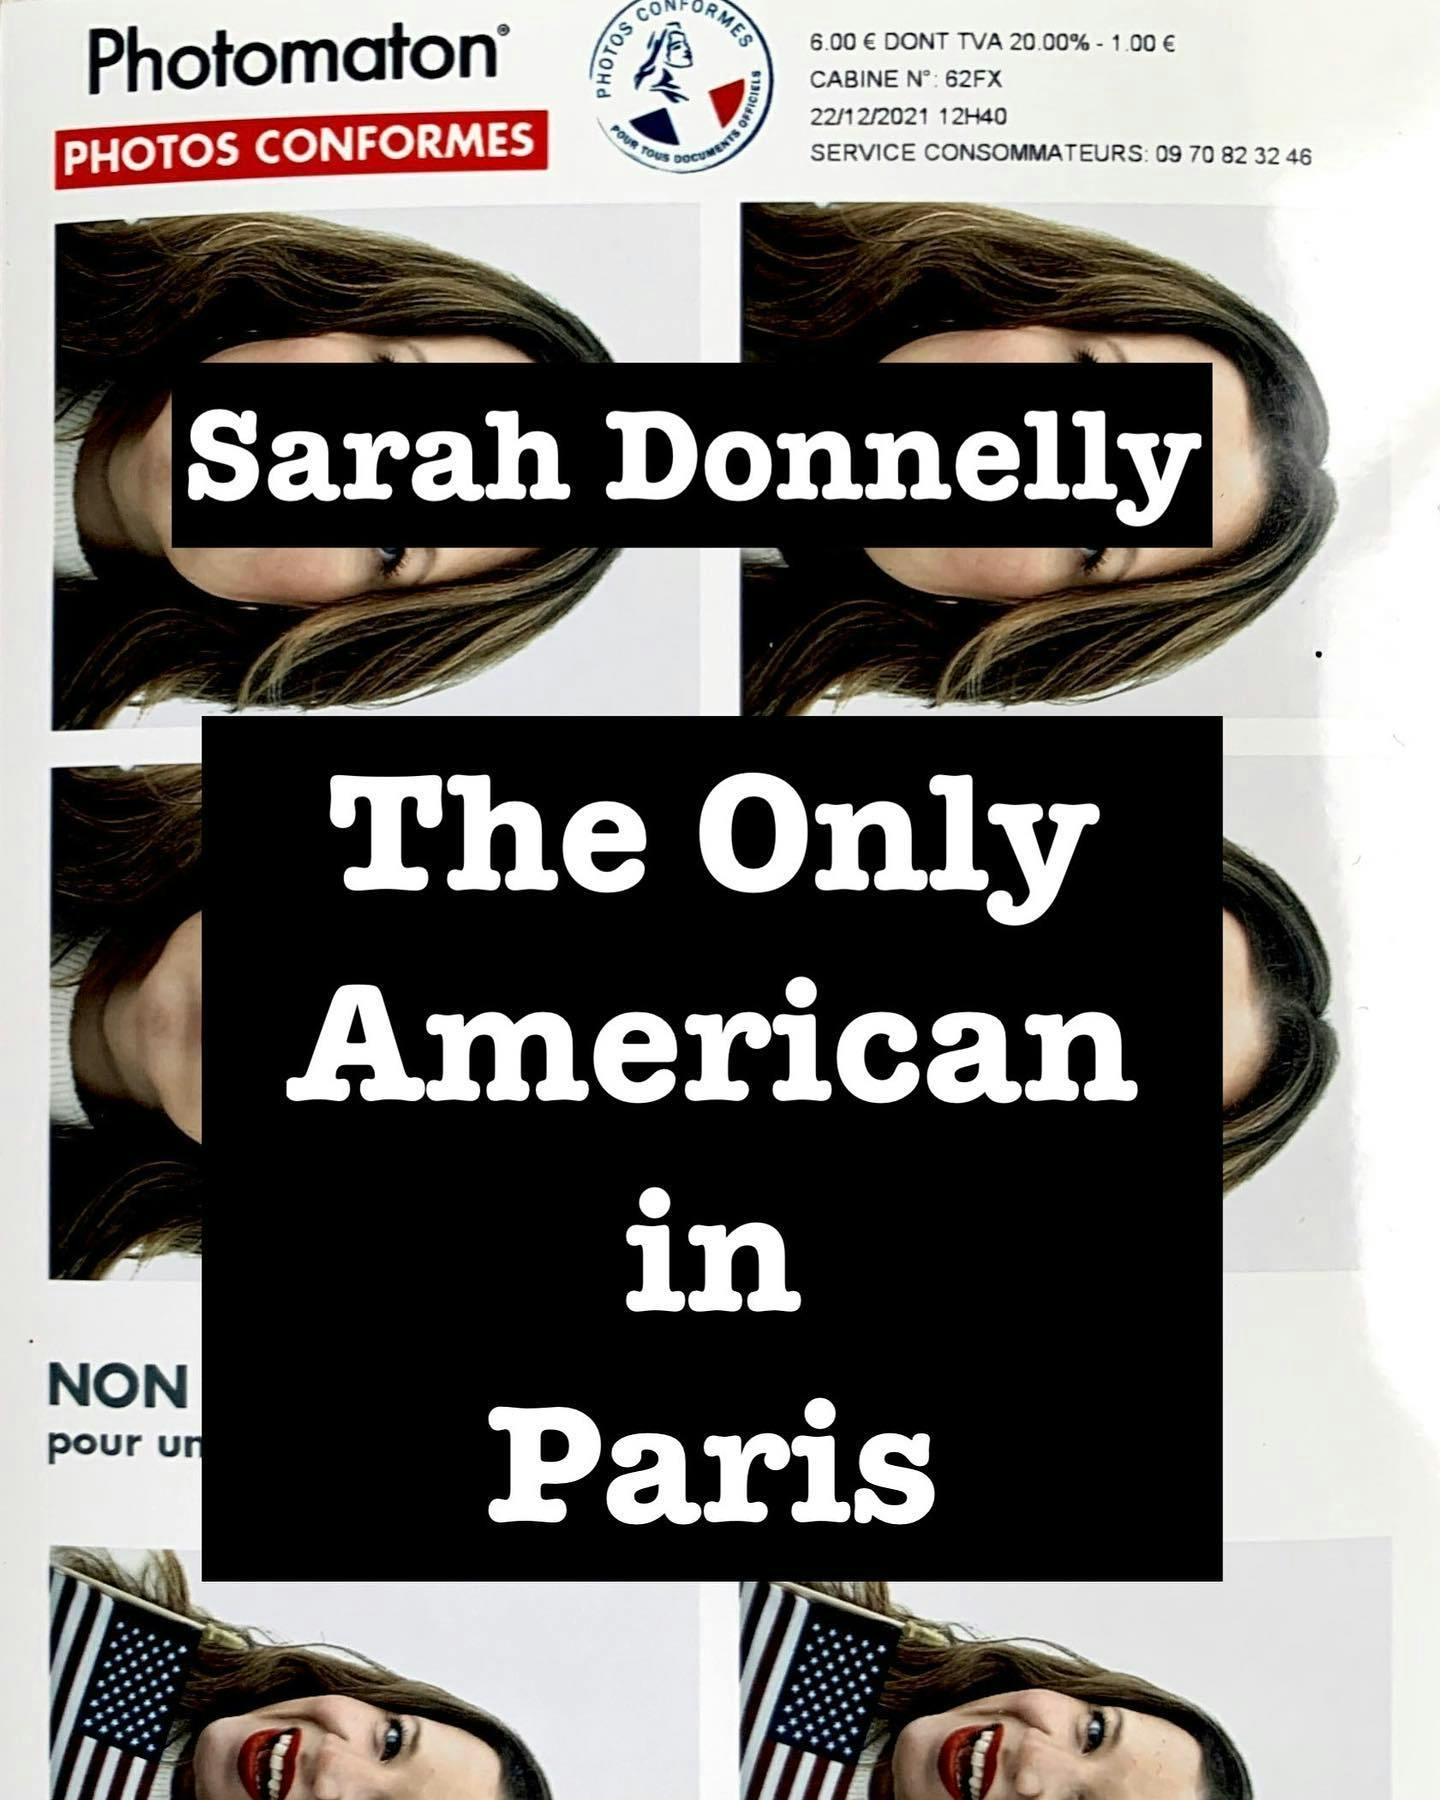 Sarah Donnelly: The Only American in Paris logo